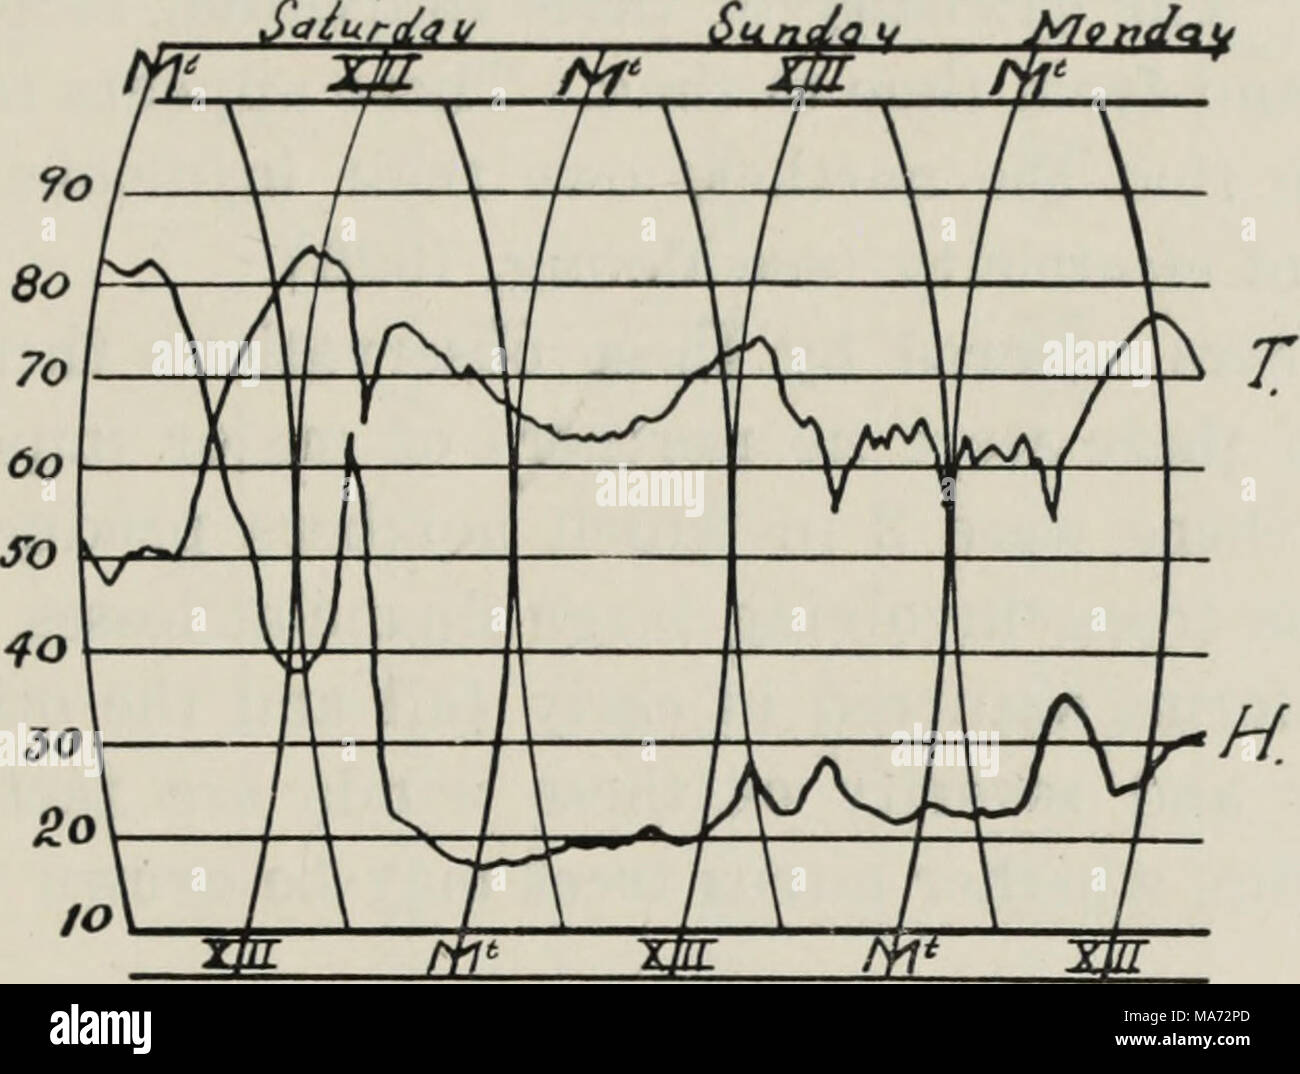 . The effects of desiccating winds on citrus trees . Fig. 14.—Data on temperature and humidity at Villa Park during a norther, December 3 and 4, 1927. Copy of the chart from the hygro-thermograph. T, temperature; H, humidity. In 1928 the injury by northers was less severe than in the preced- ing year, although citrus trees suffered windburn in certain places. As shown in table 9, there was a norther which started on November TABLE 9 Temperature, Humidity, and Wind Velocity Eecords at Selected Points During a Norther, November 17-21, 1928 November November November Station 17 18 19 20 21 17 18  Stock Photo